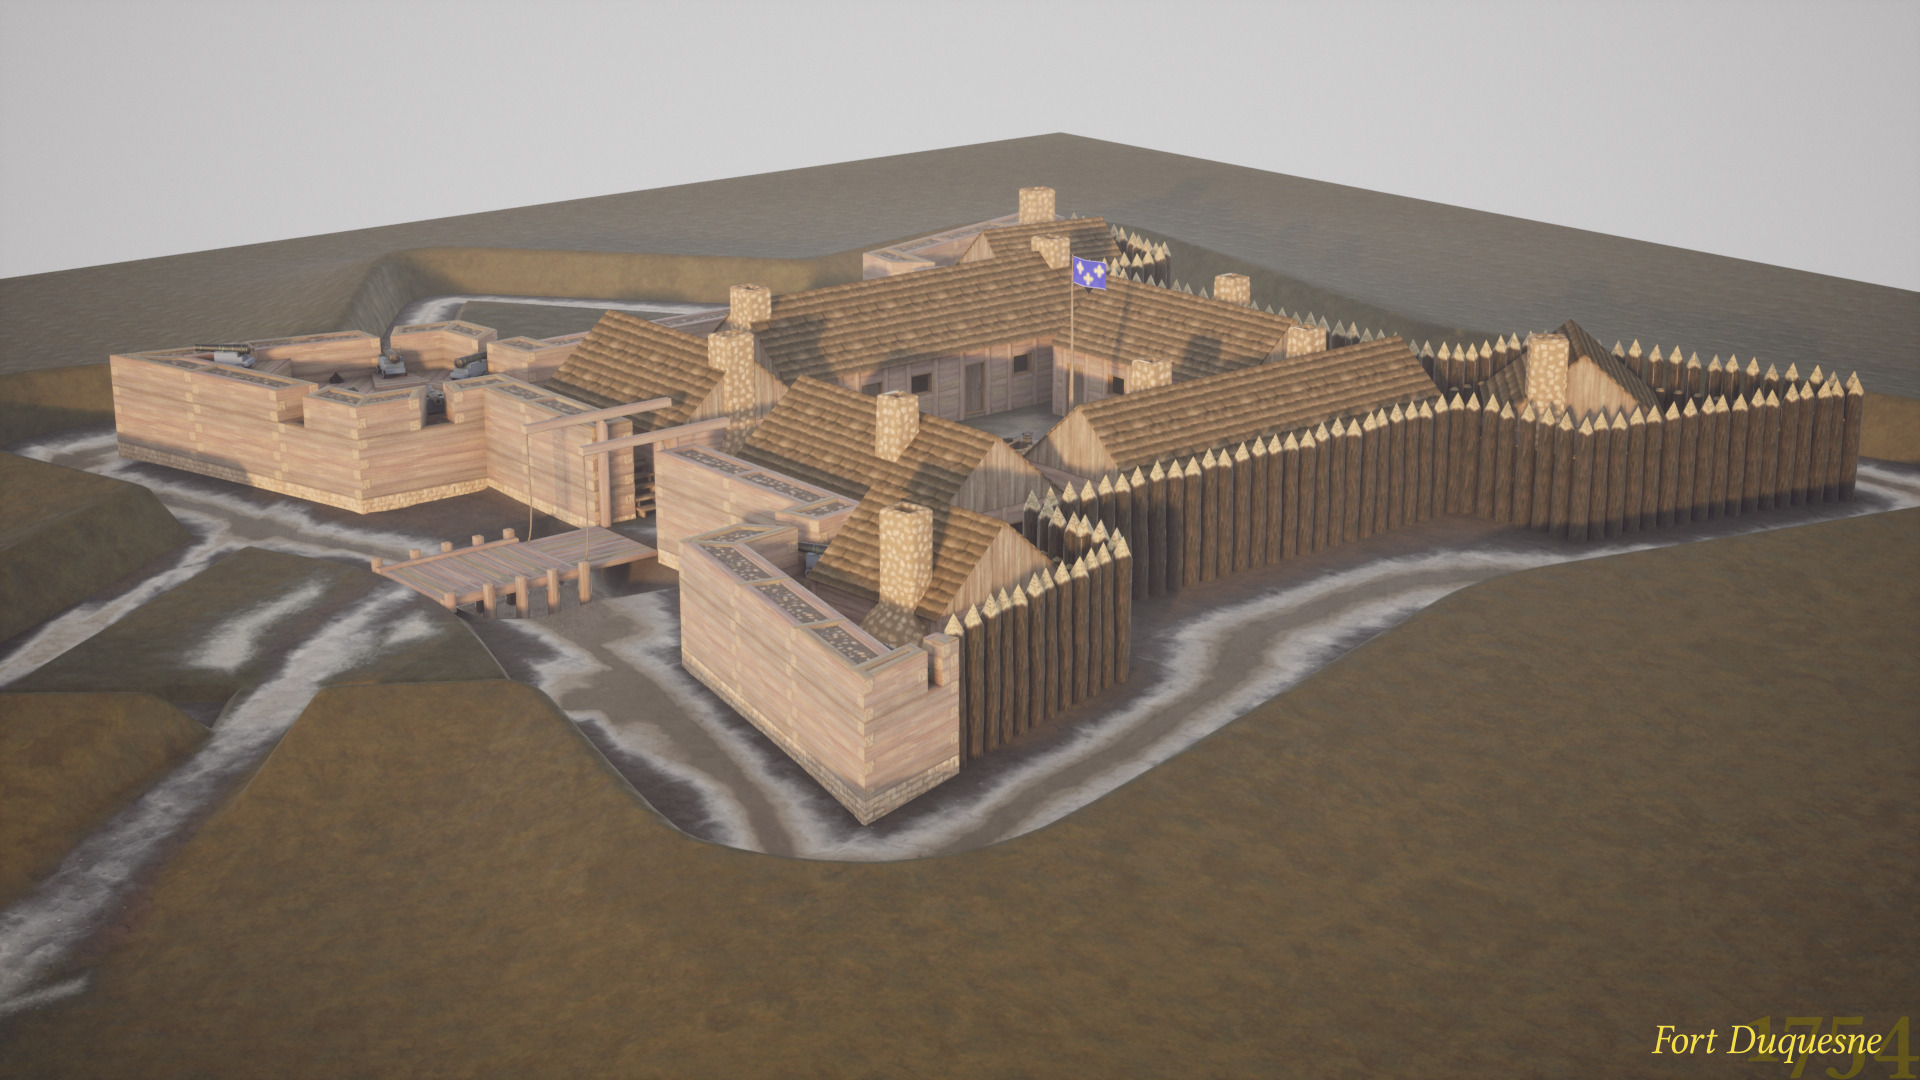 A 3D model of a wooden fort named Fort Duquesne. The fort is star-shaped with a pentagonal bastion in the foreground. The fort has a moat and log cabins inside its walls. There is a flagpole flying the flag of New France in the central parade.